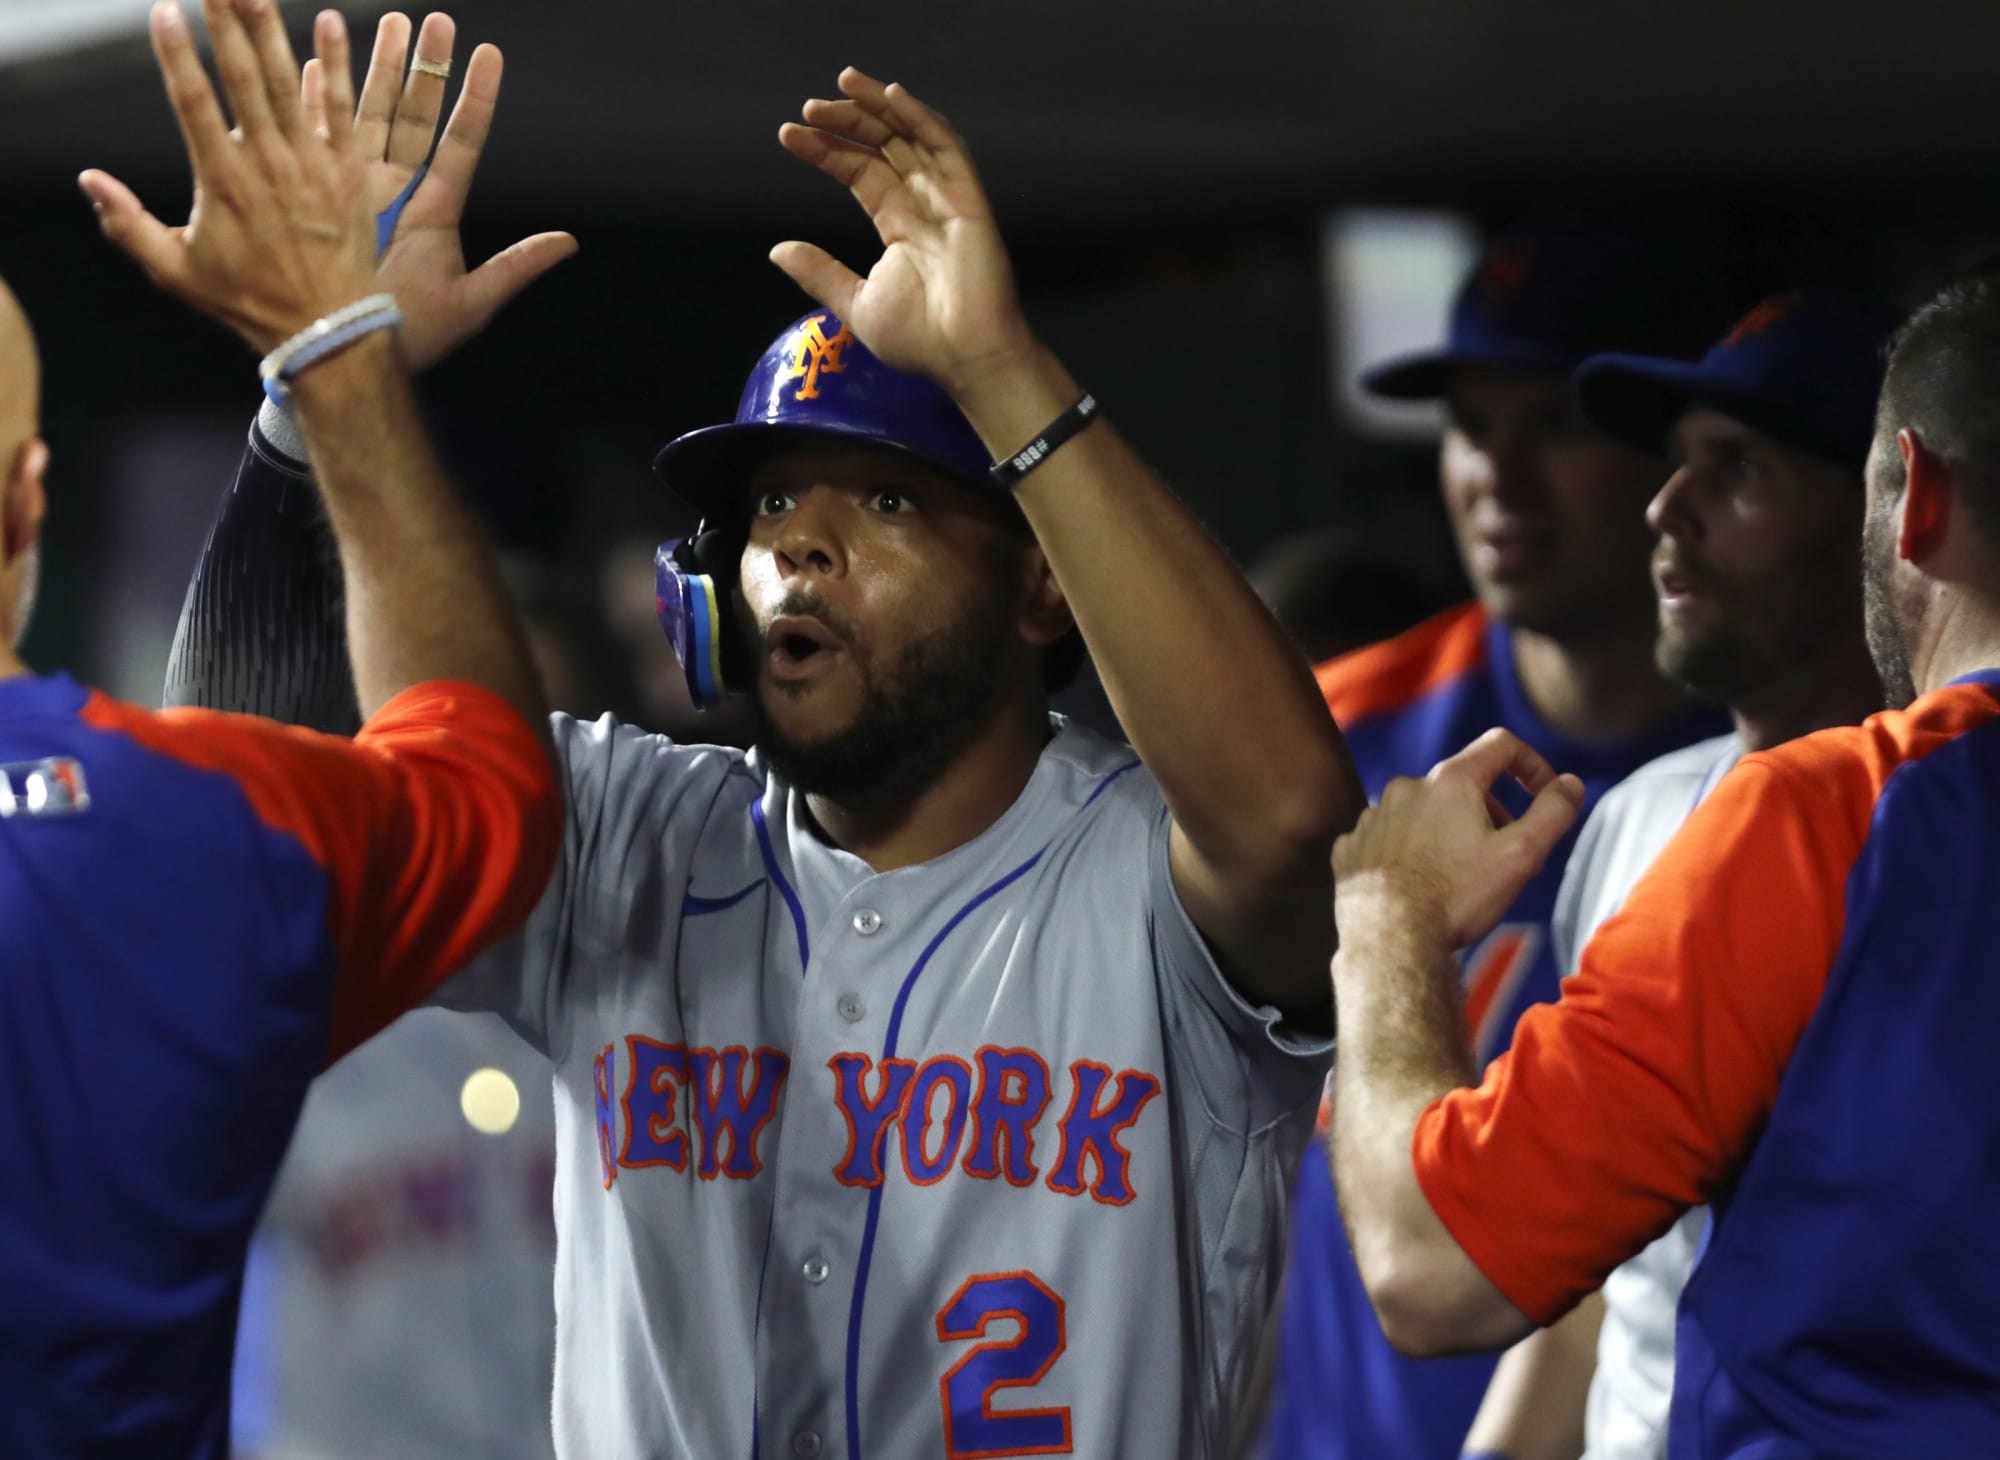 Cubs Have Reportedly Engaged with Mets on First Baseman Dominic